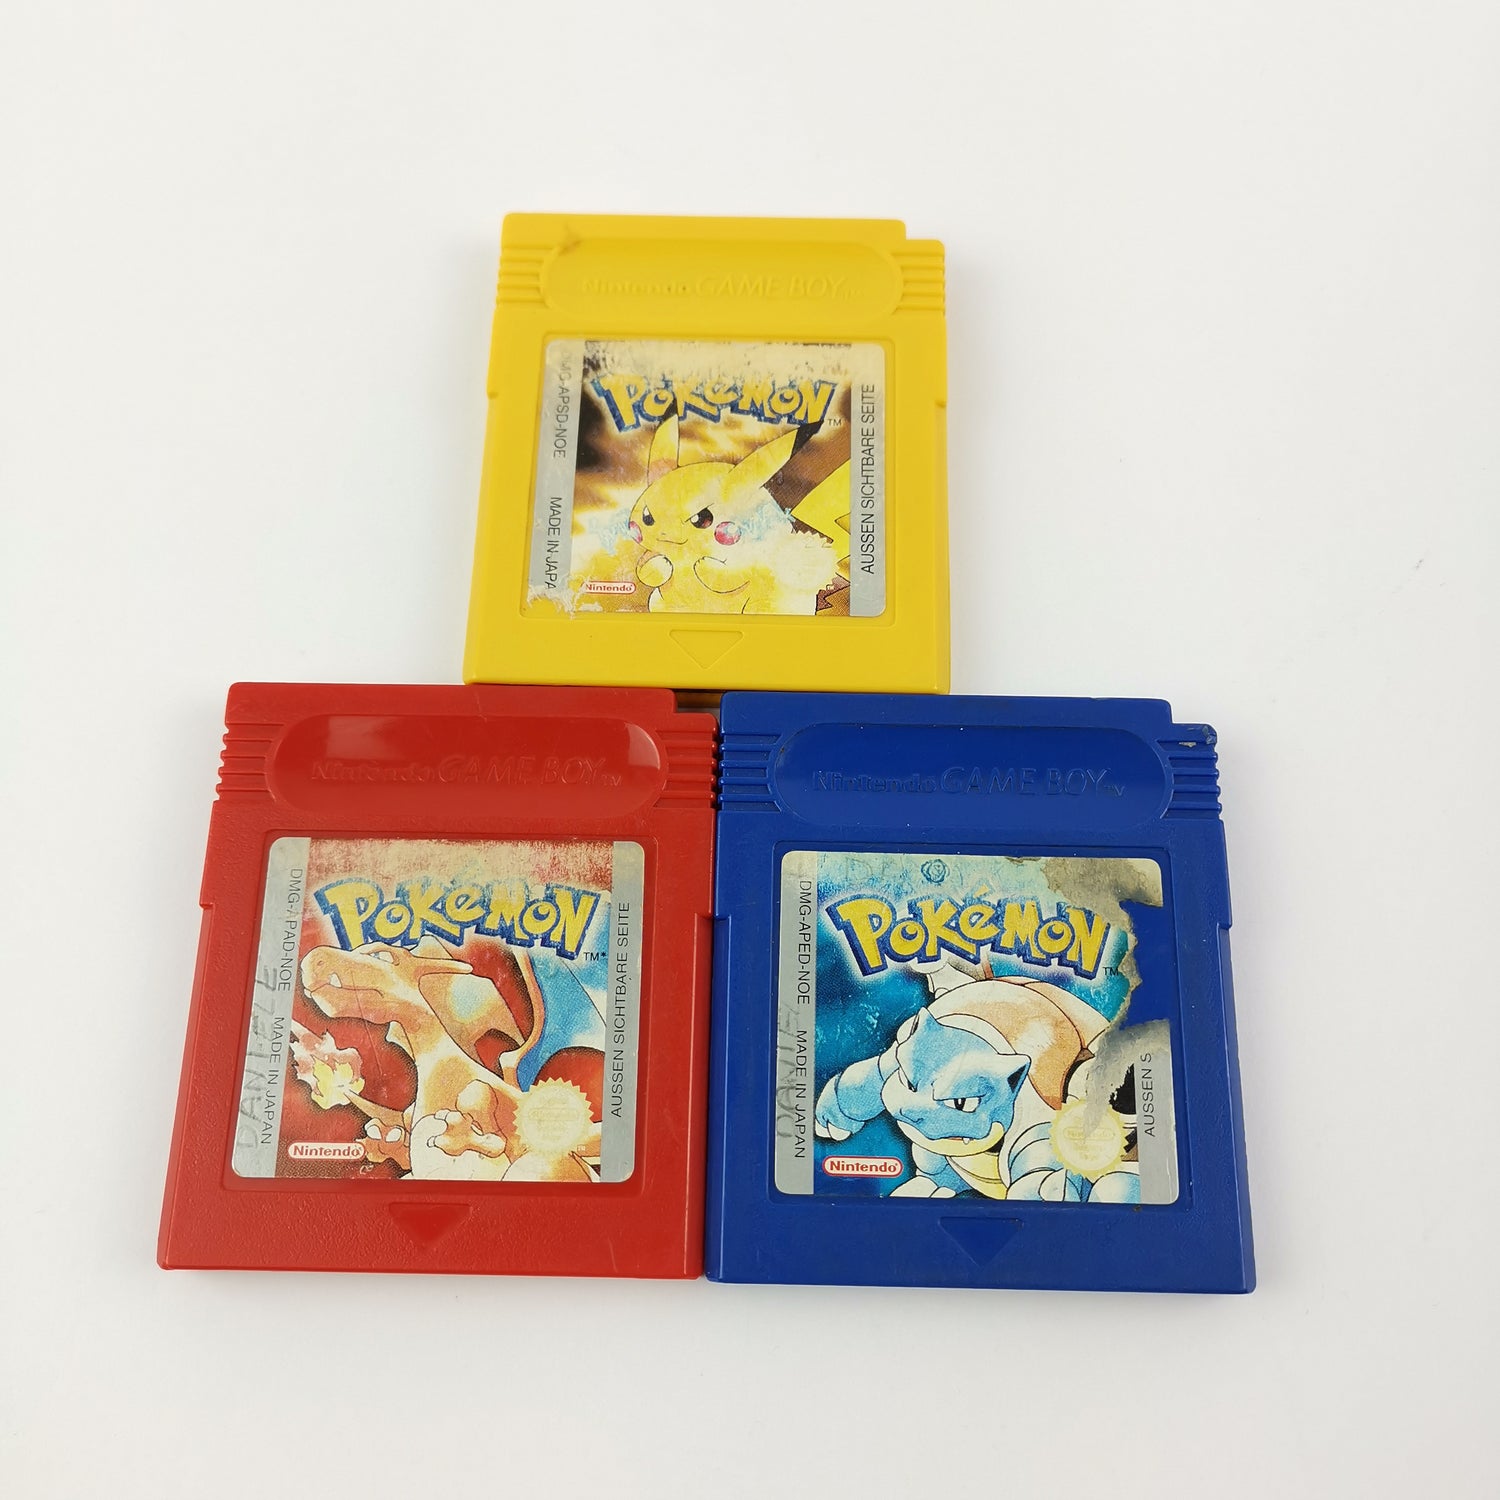 Nintendo Game Boy Color Console in Yellow + Pokemon Red - Blue - Yellow Edition